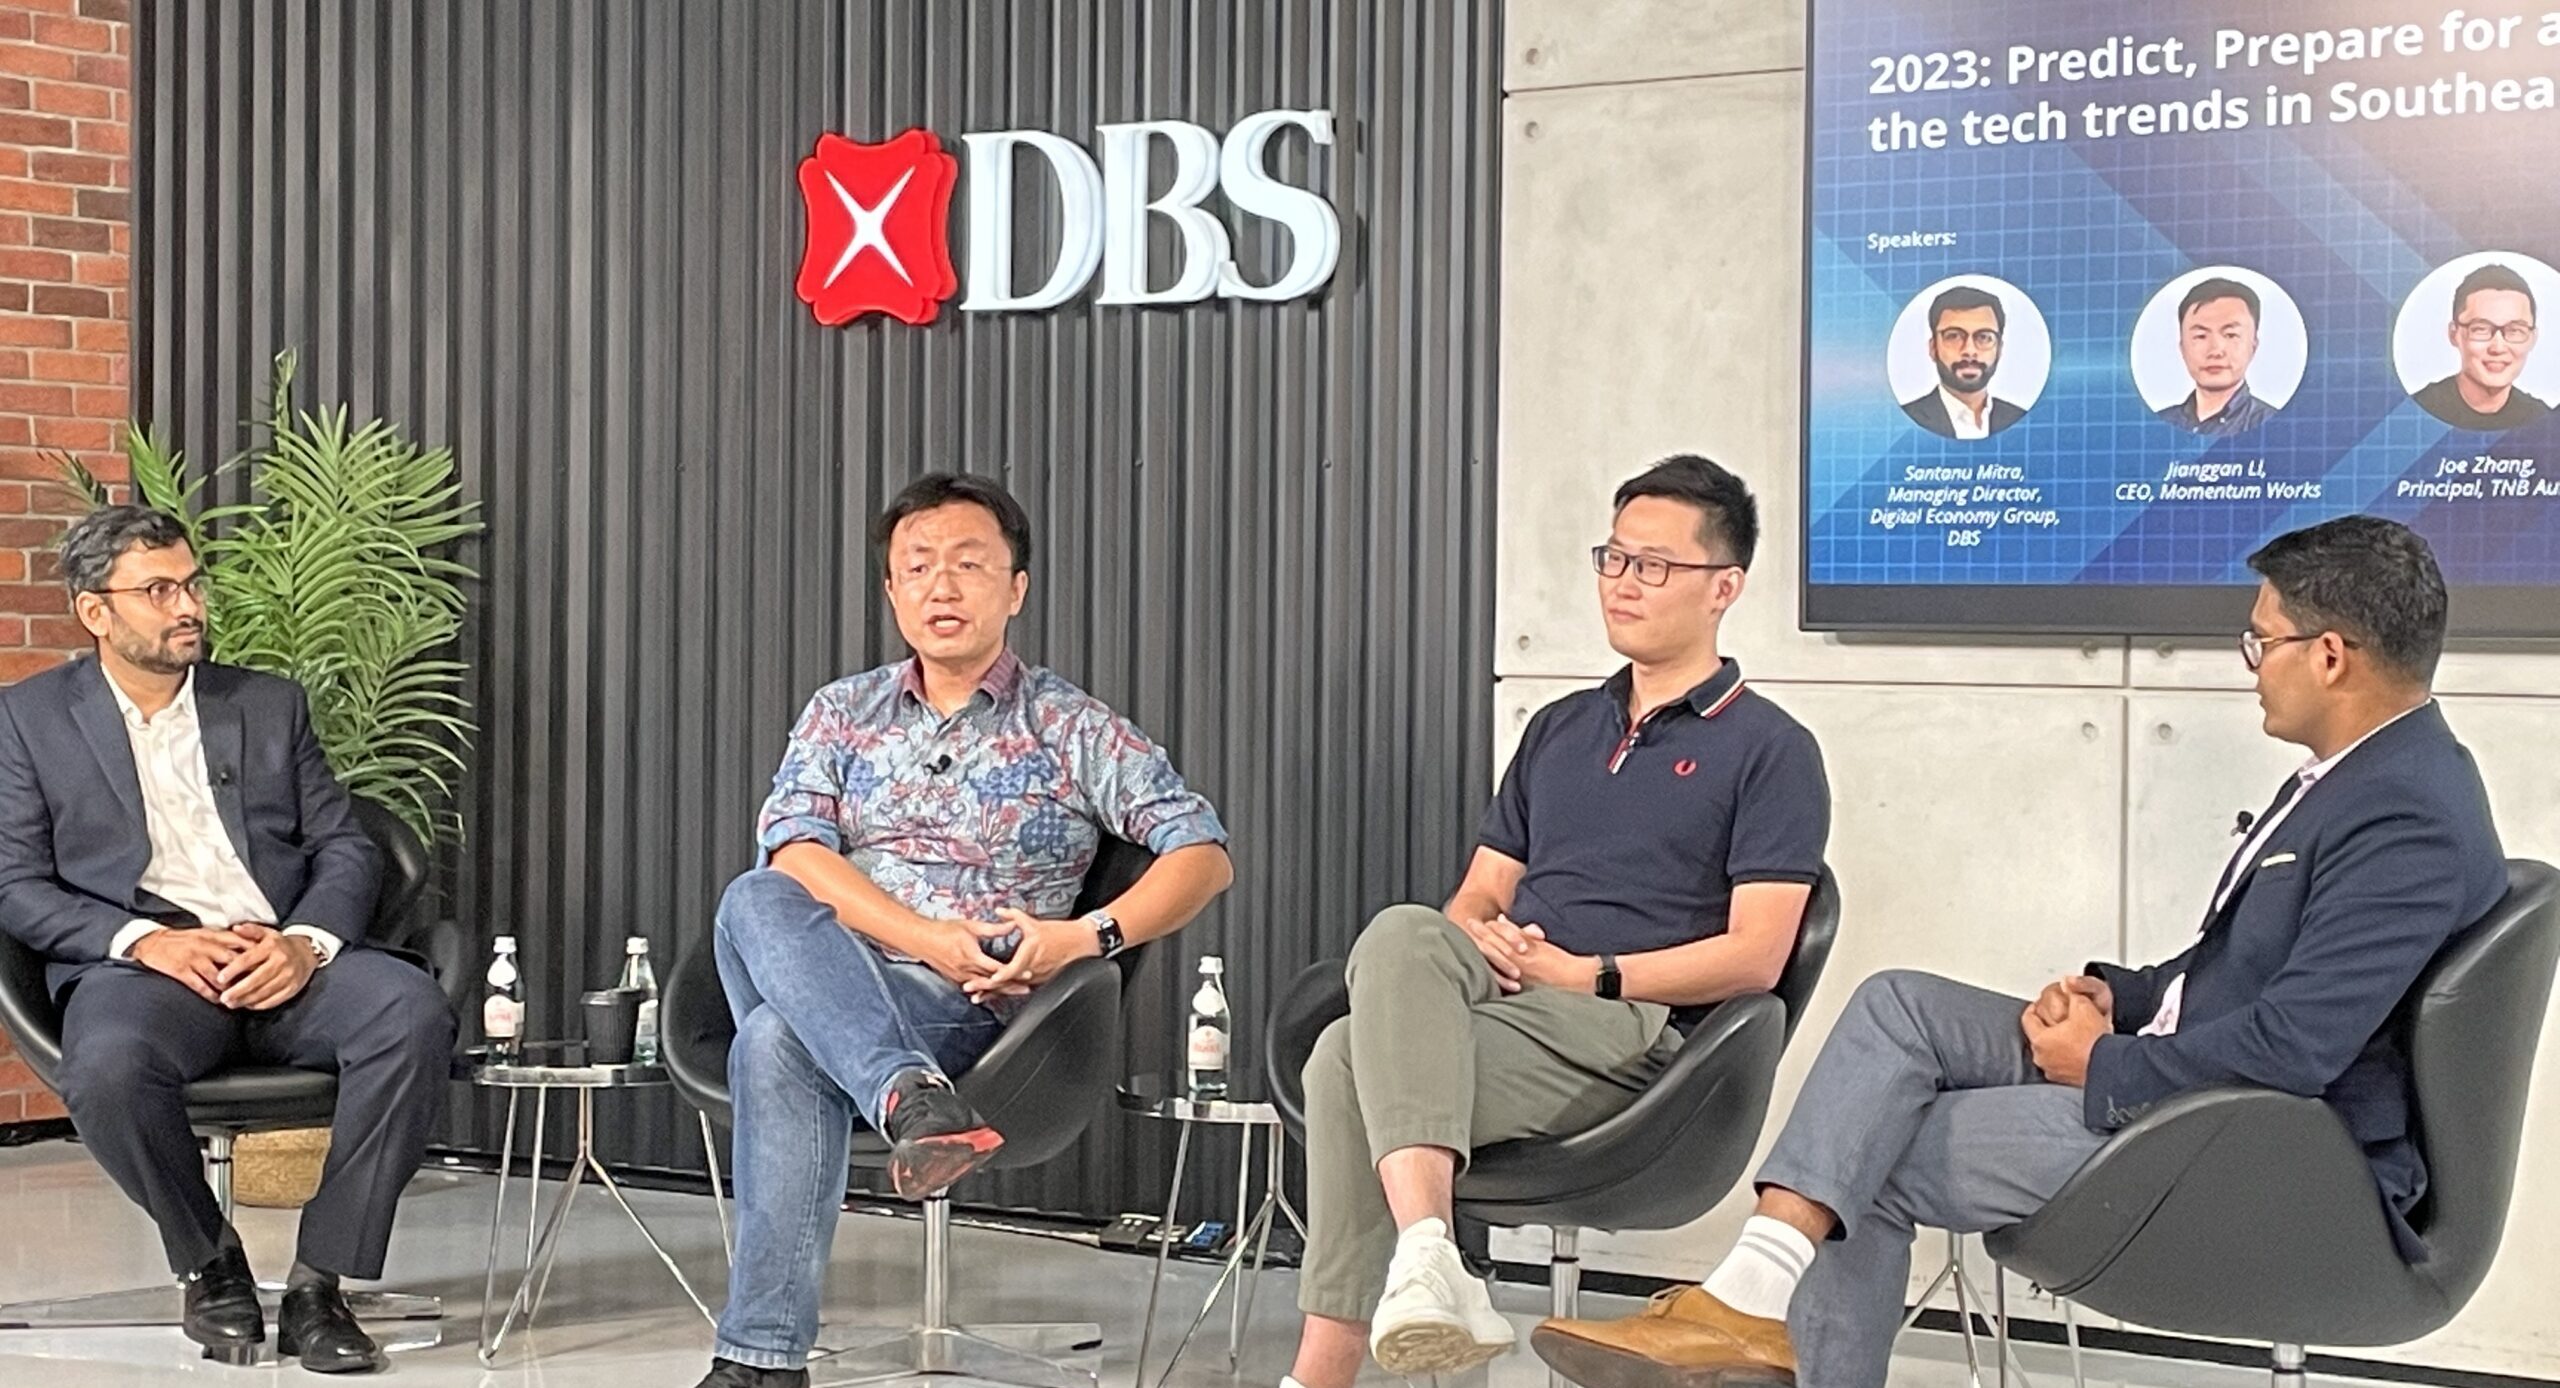 Panel discussion: Identifying the next unicorn in Southeast Asia